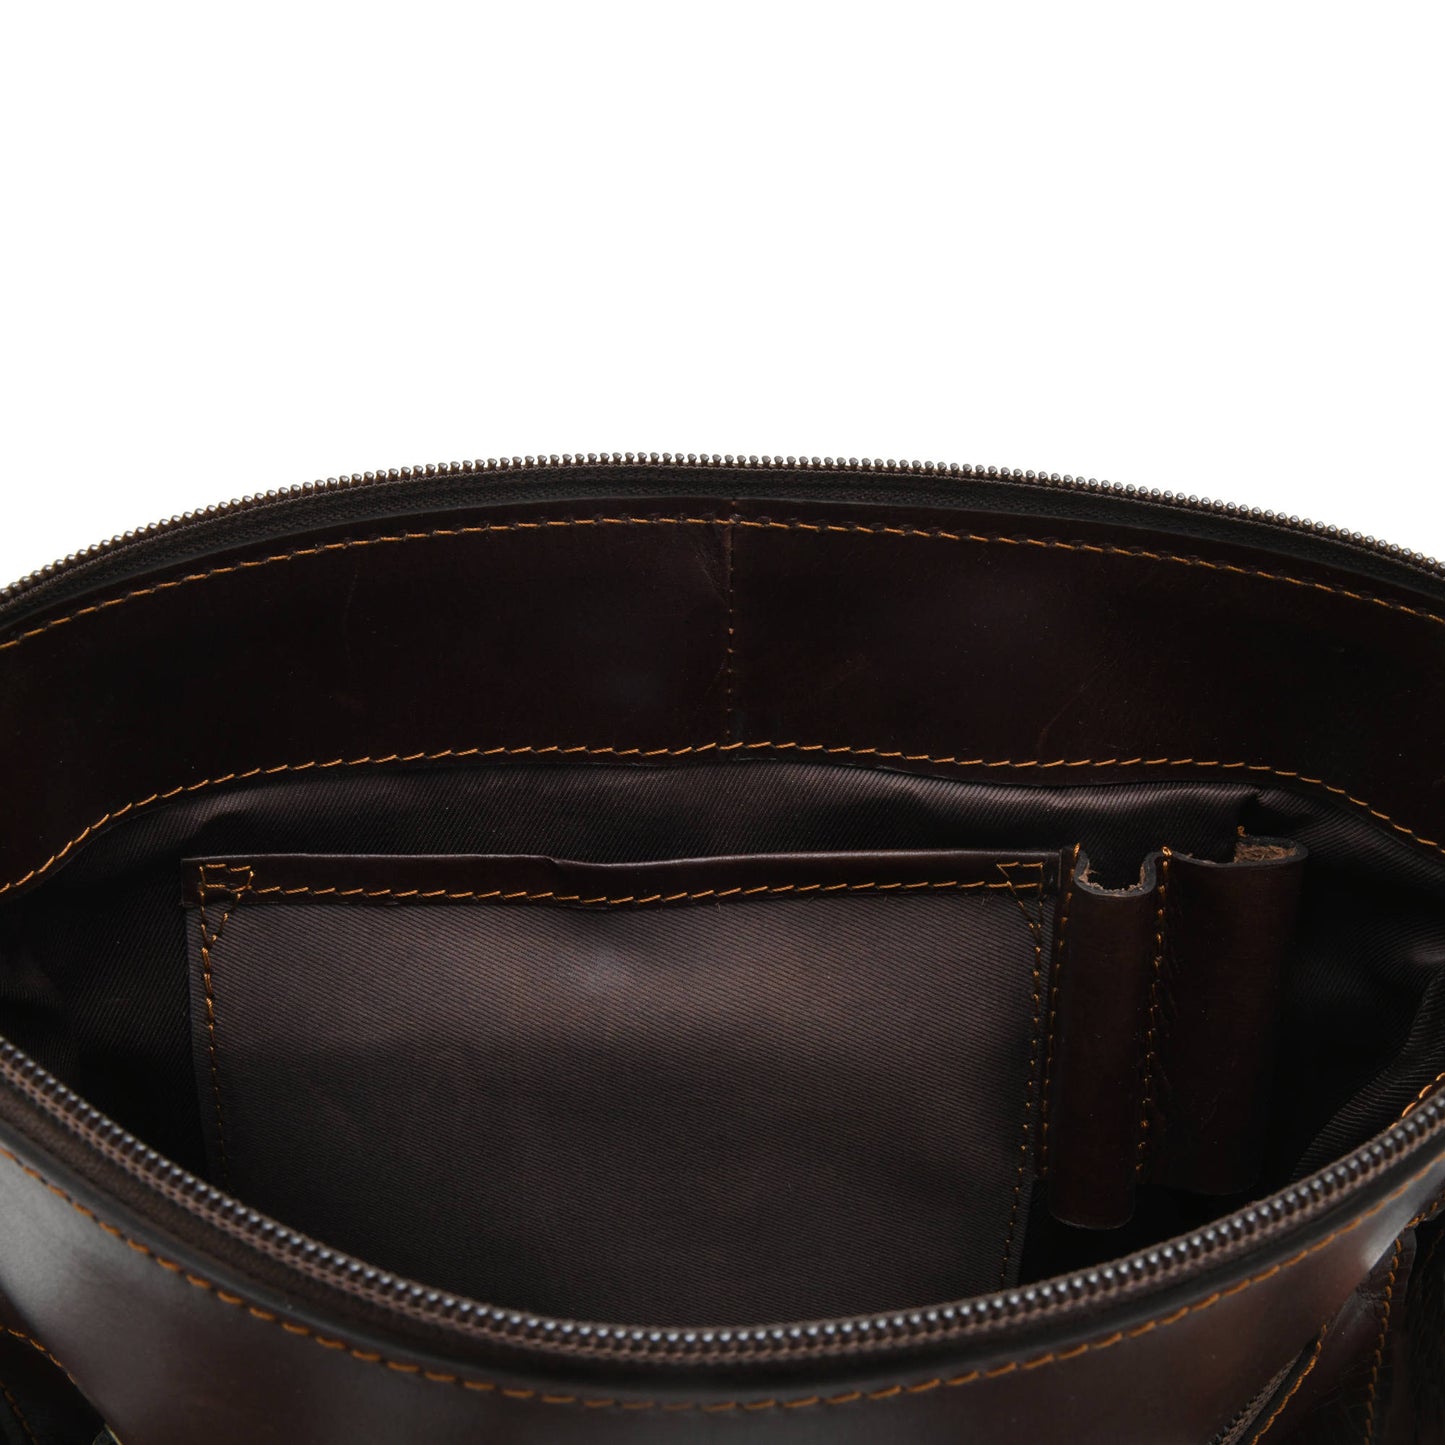 Style n Craft 392002 Tall Messenger Bag in Full Grain Dark Brown Leather - Inside Front Wall View